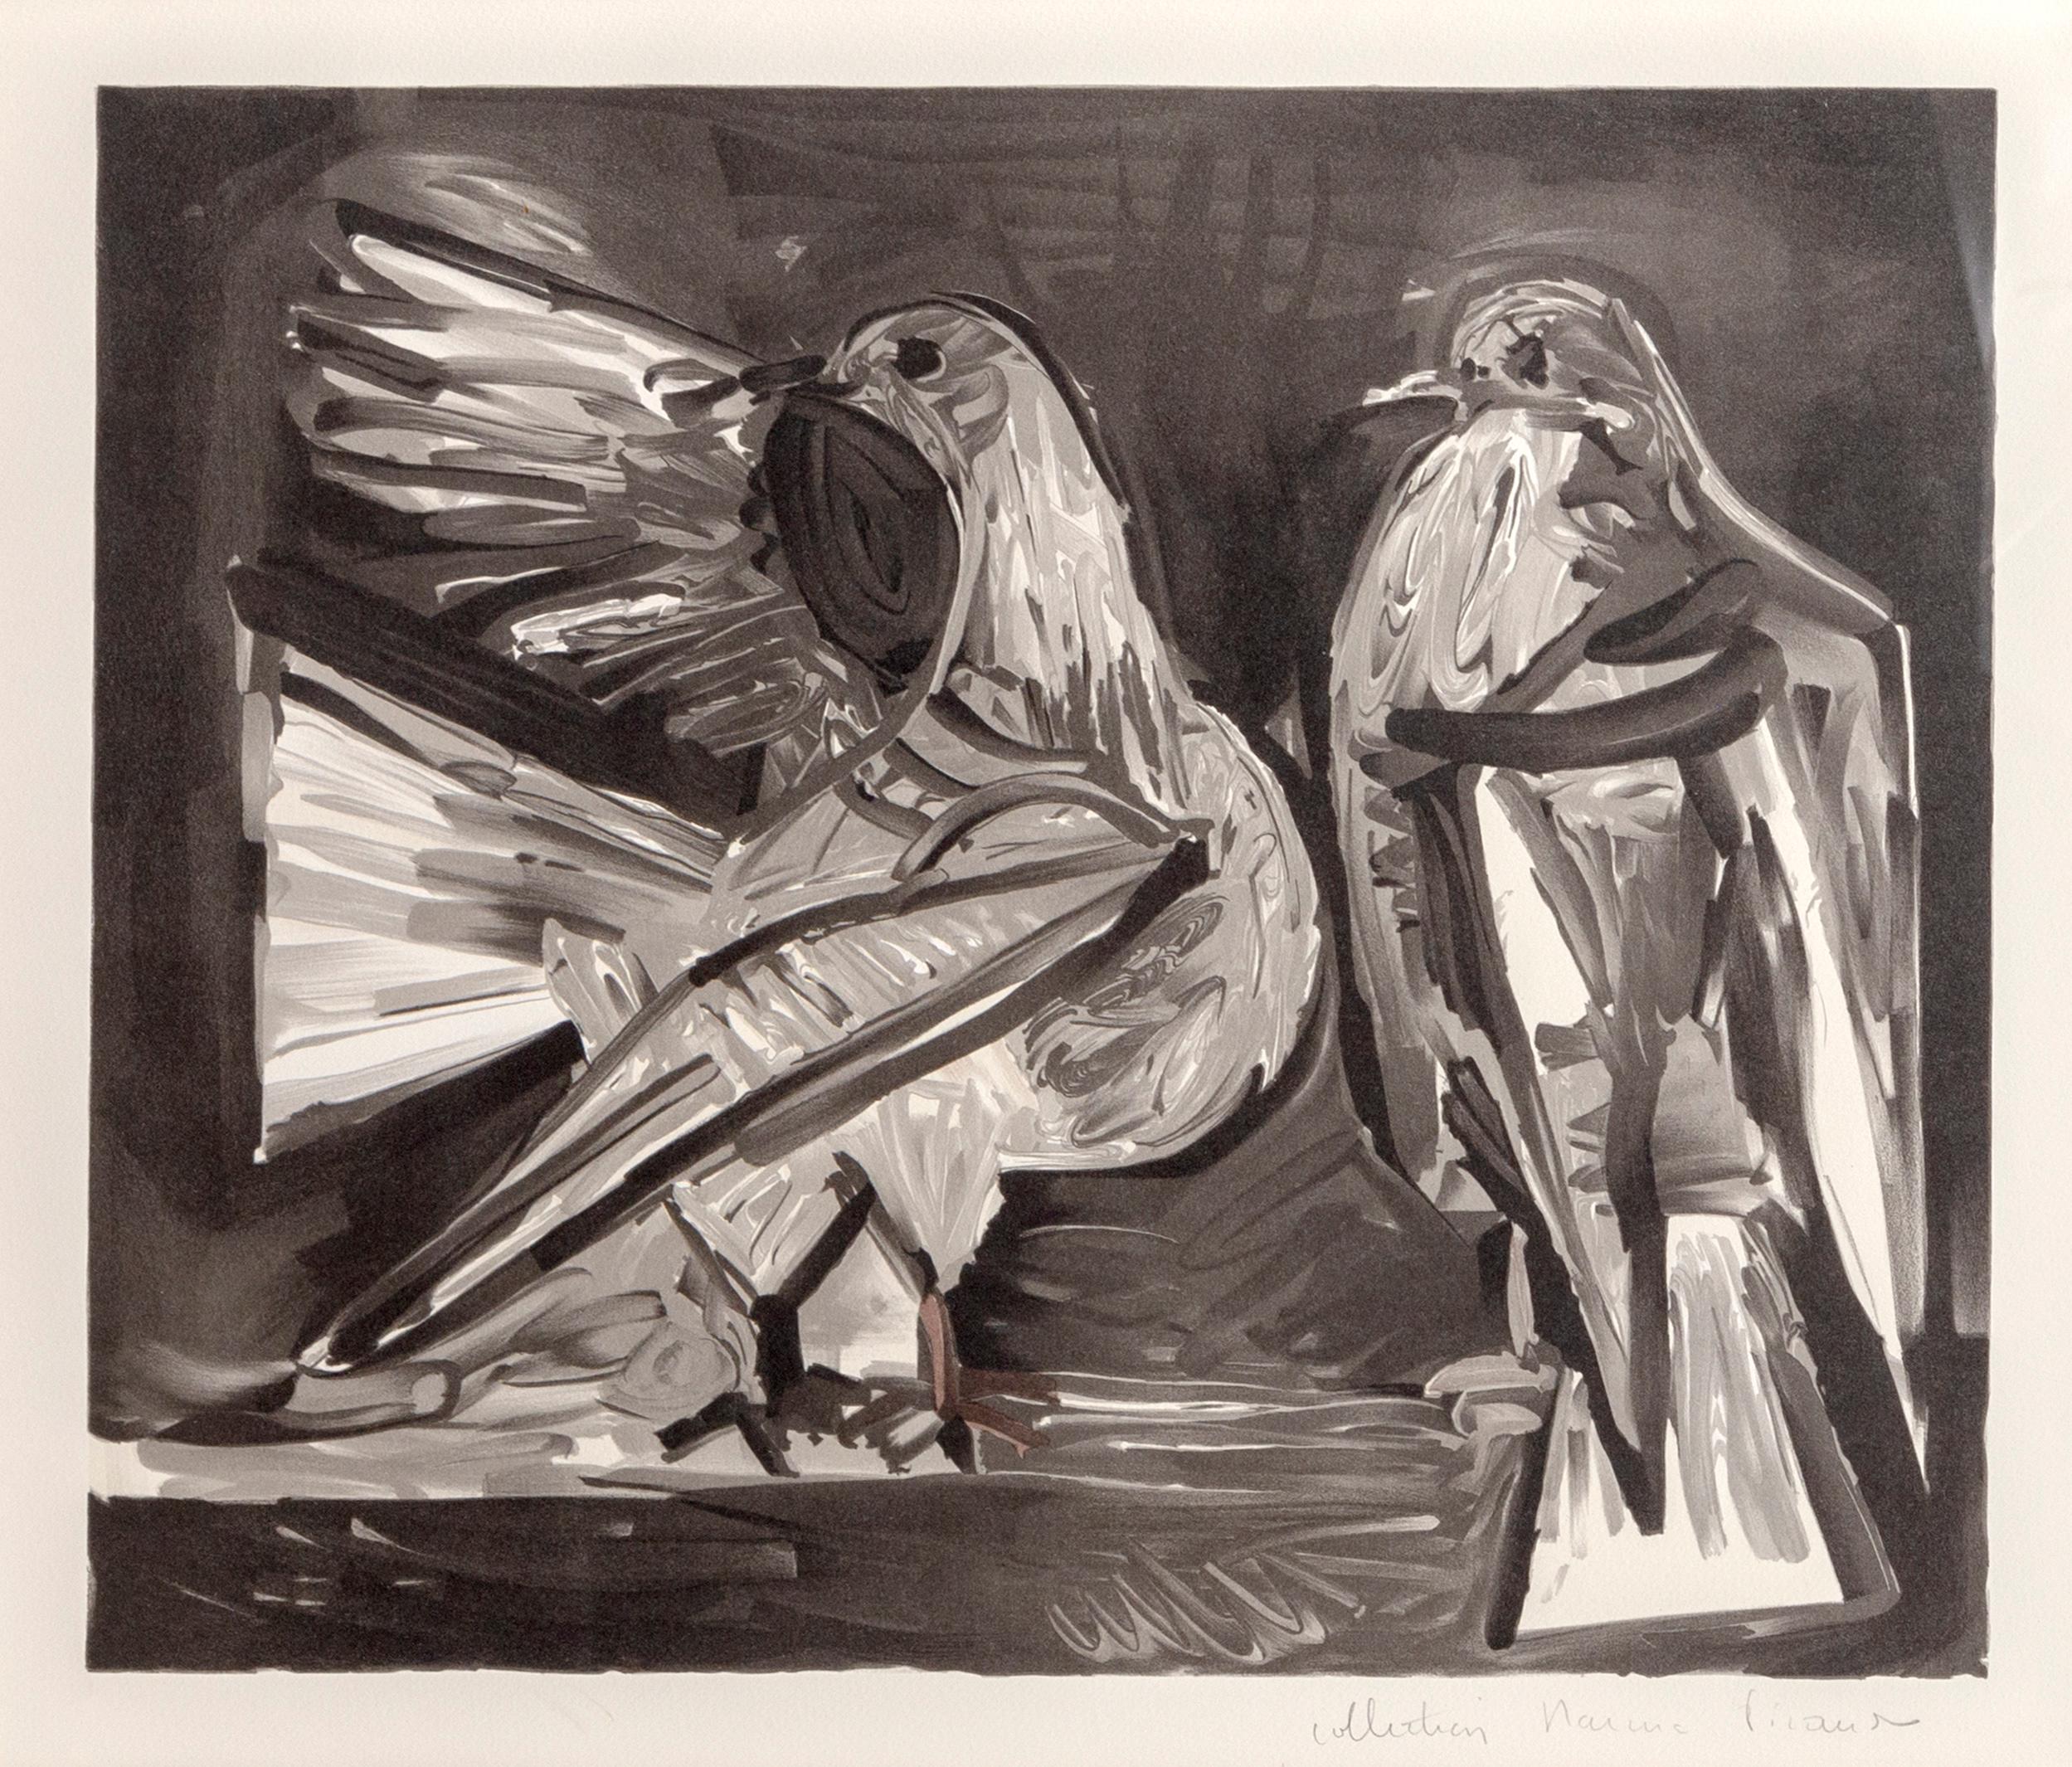 A lithograph from the Marina Picasso Estate Collection after the Pablo Picasso painting 